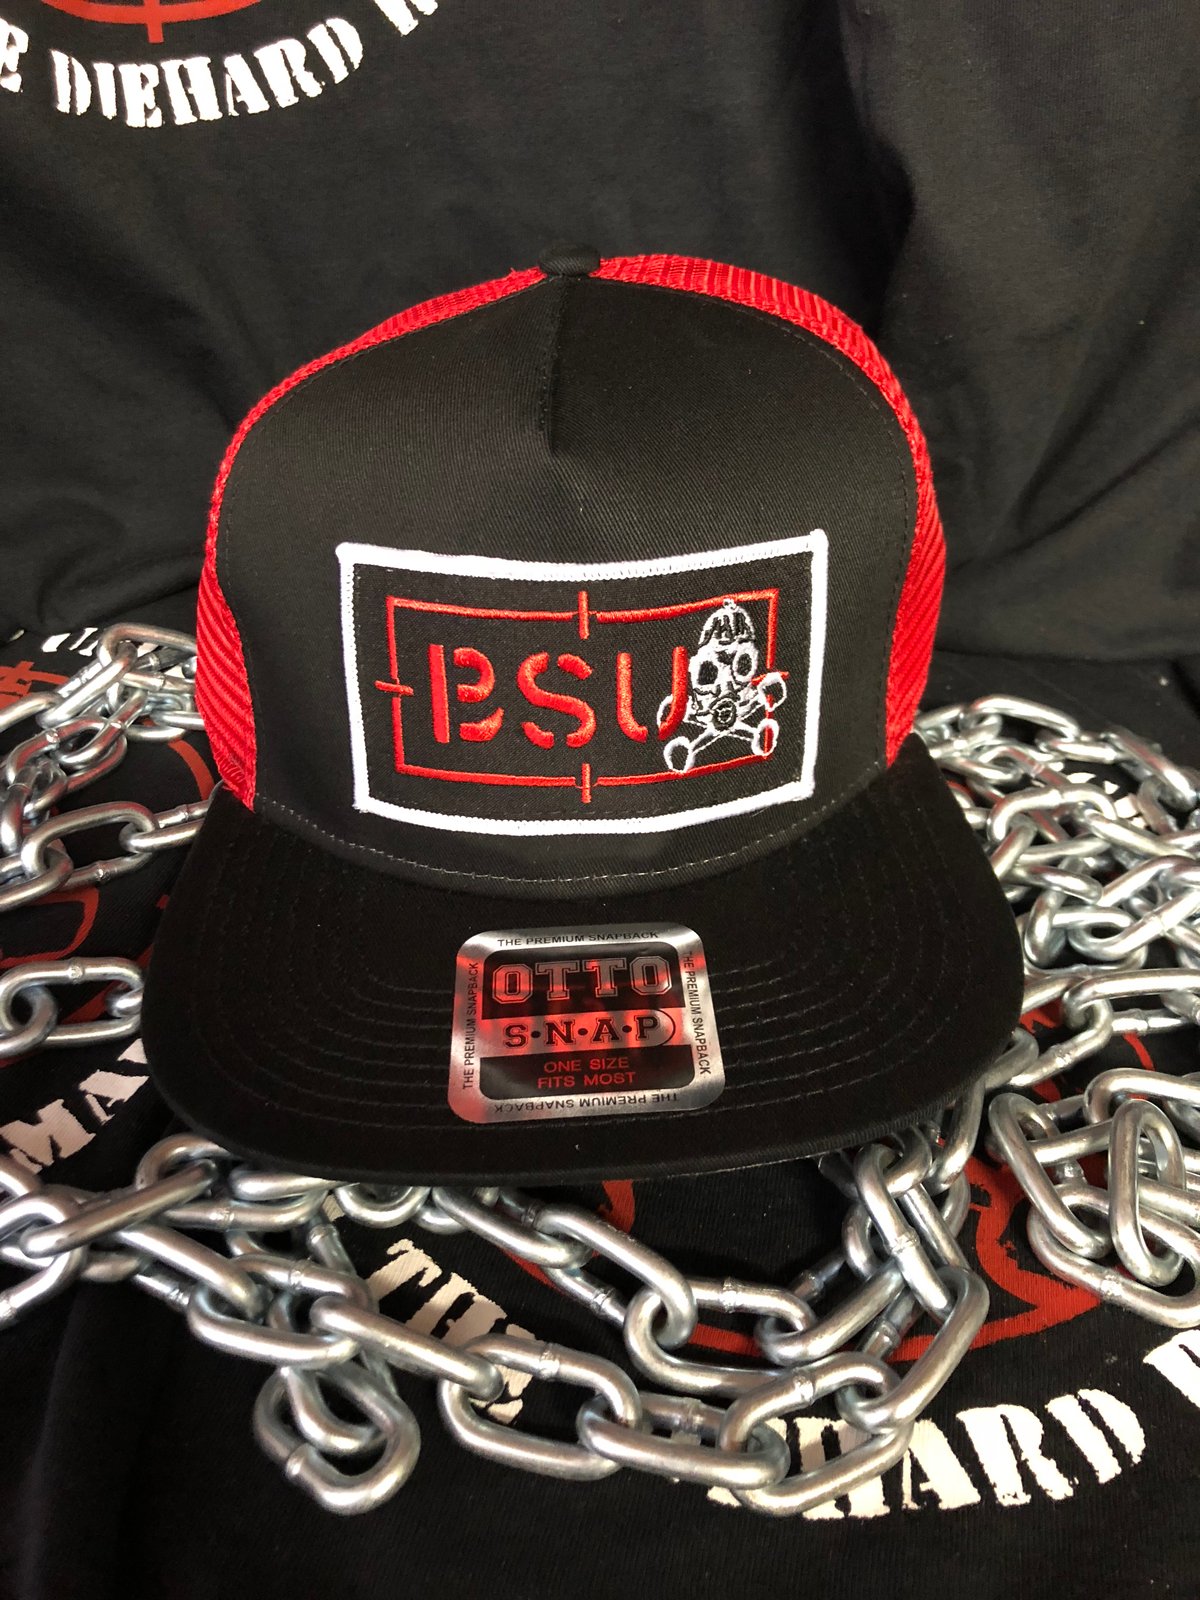 Image of BSU Red/Bk Recon patch hat. 